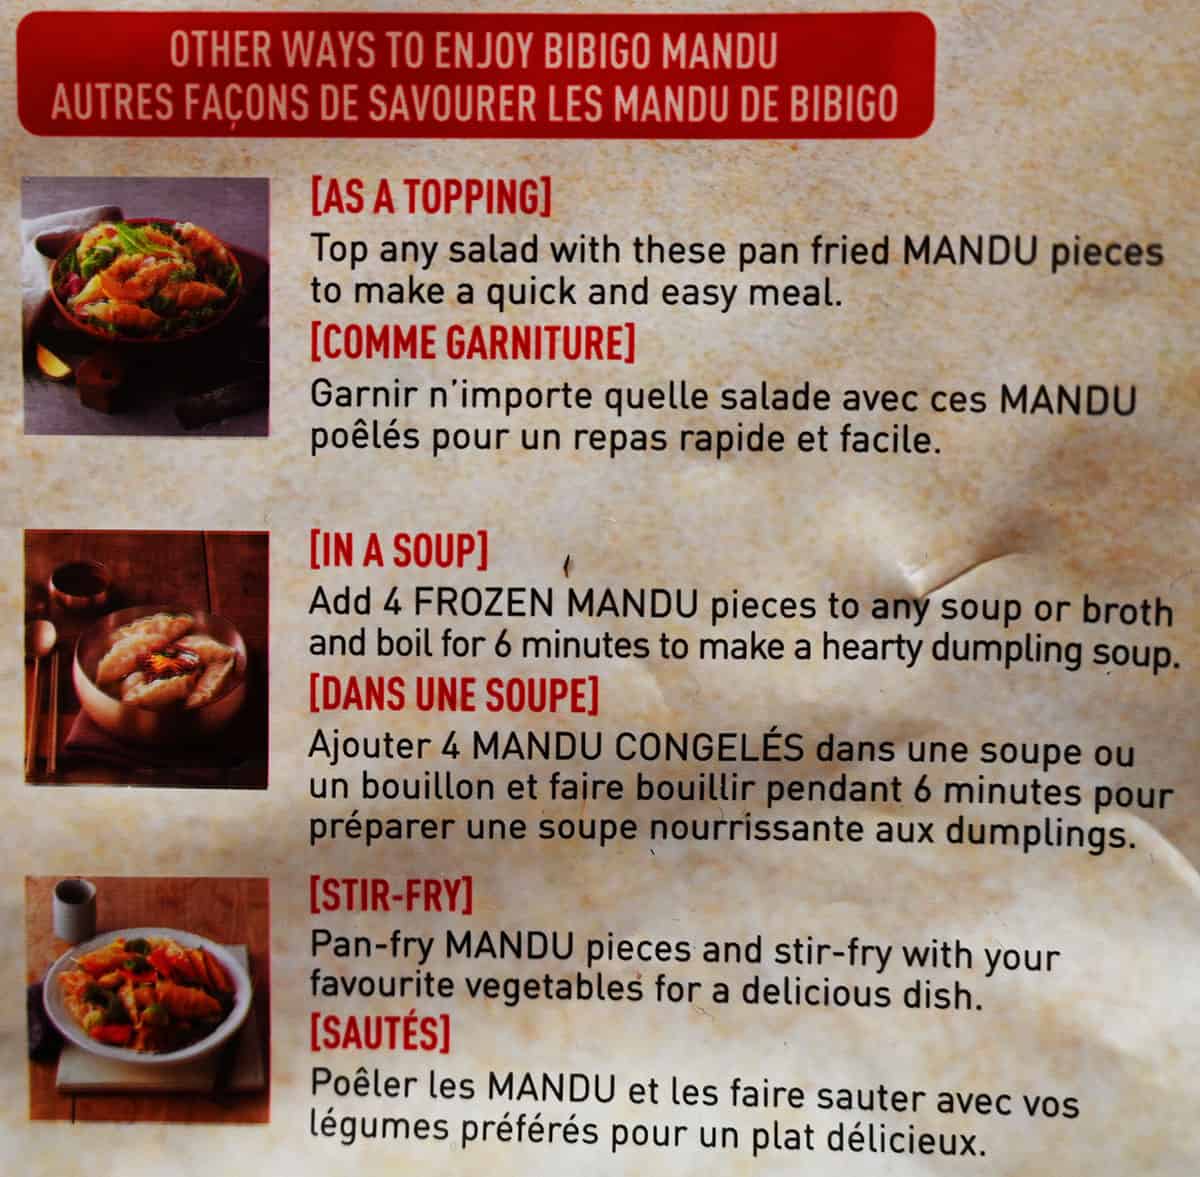 Ideas on how to use the mandu as a topping, in soup or a stir fry from the bag. 